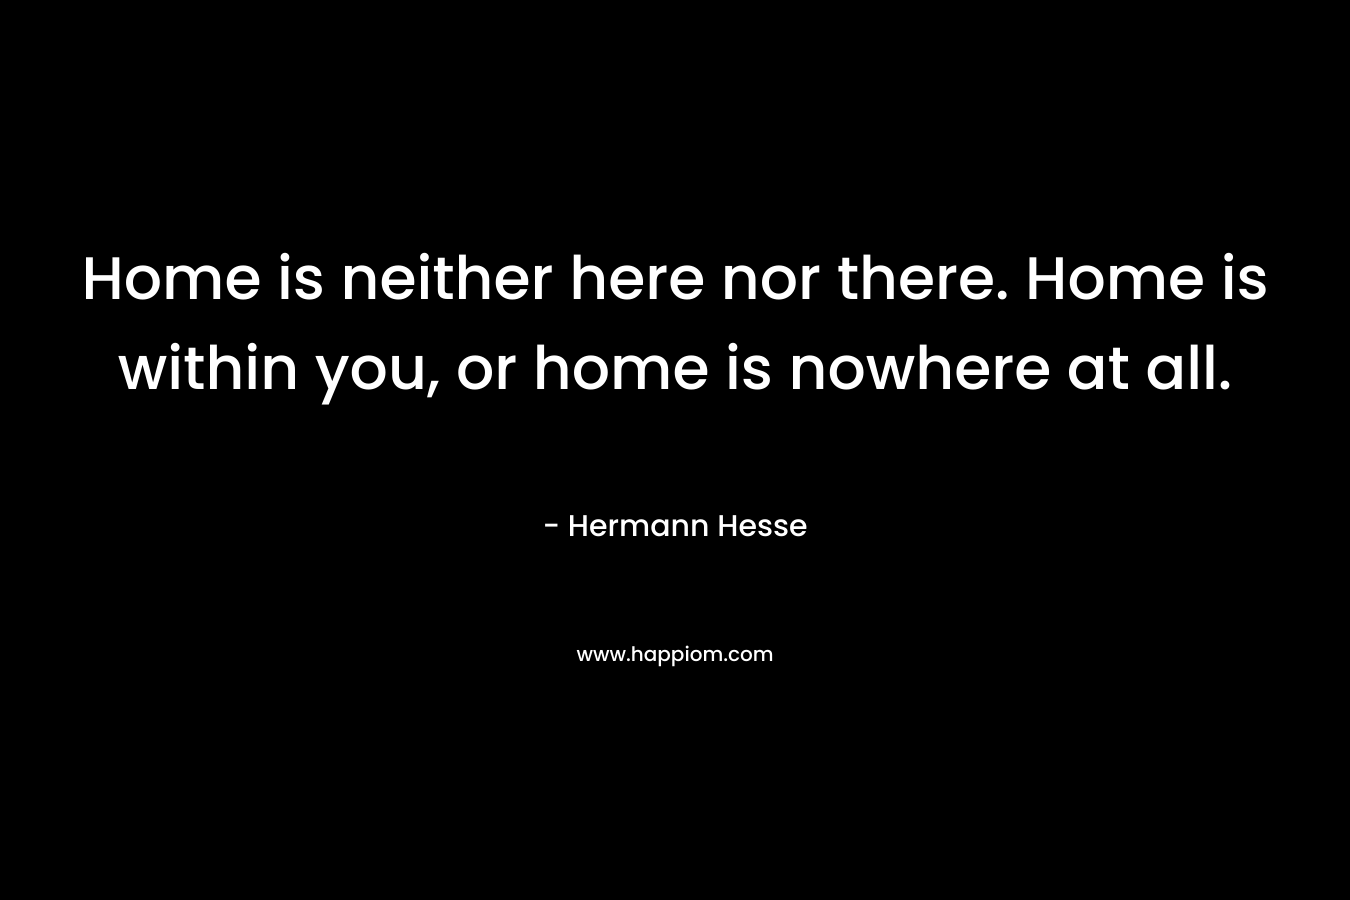 Home is neither here nor there. Home is within you, or home is nowhere at all.